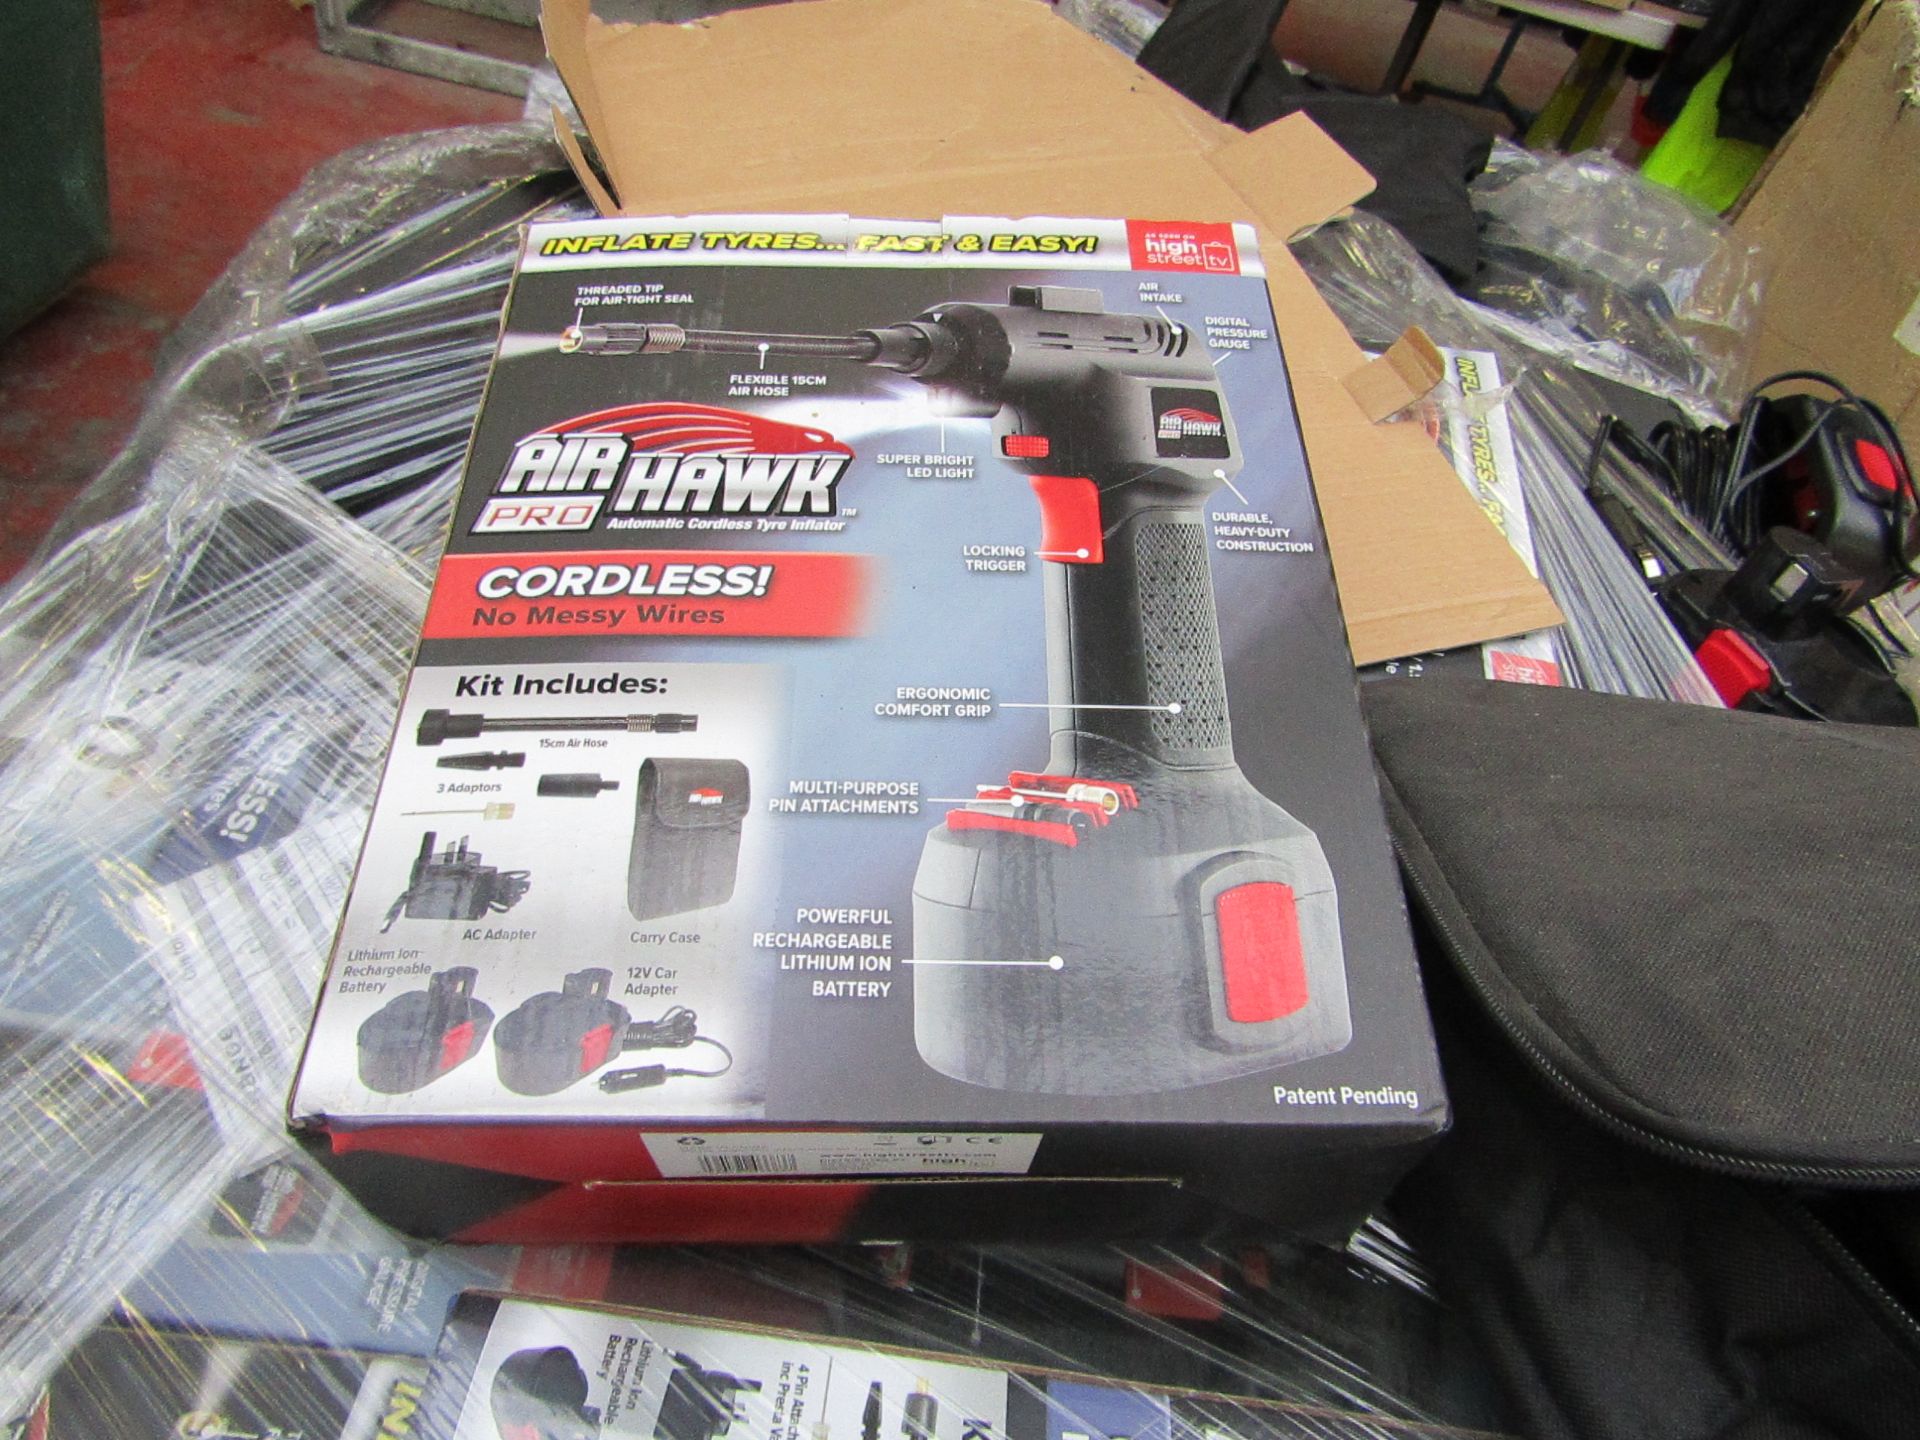 Air Hawk Pro Cordless hand held compressor, tested working and boxed | SKU C5060191466837 | RRP £